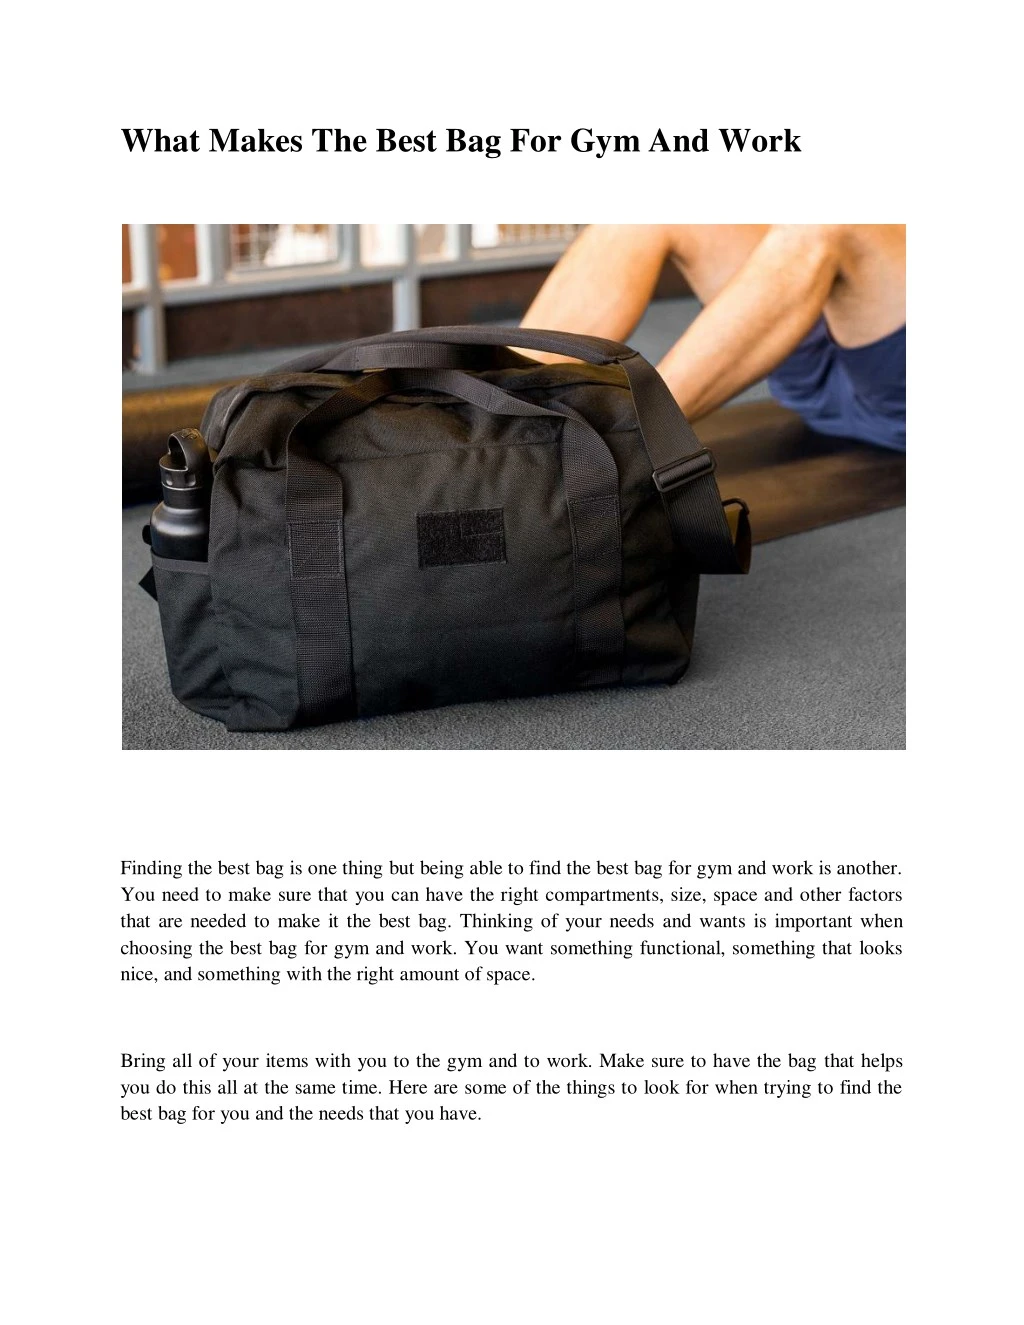 what makes the best bag for gym and work